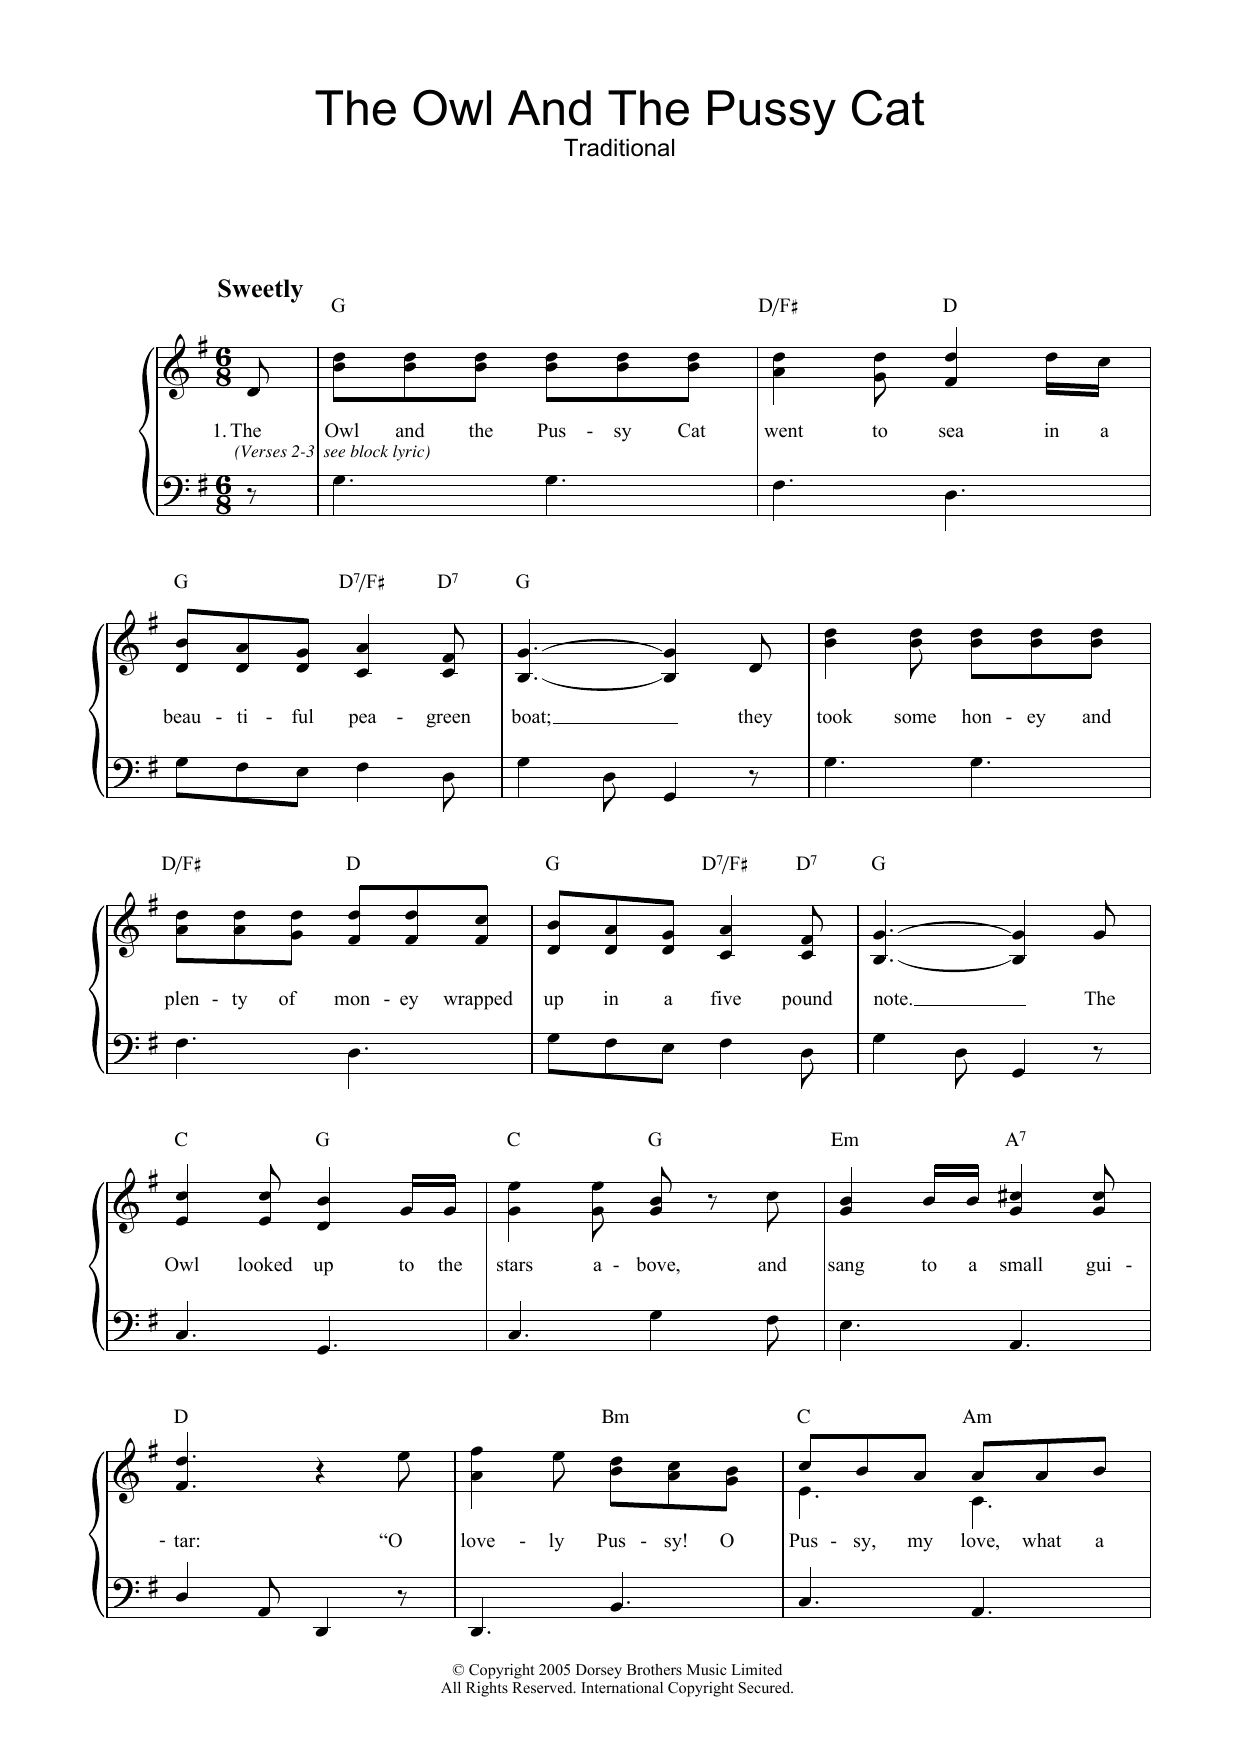 Download Traditional The Owl And The Pussy Cat Sheet Music